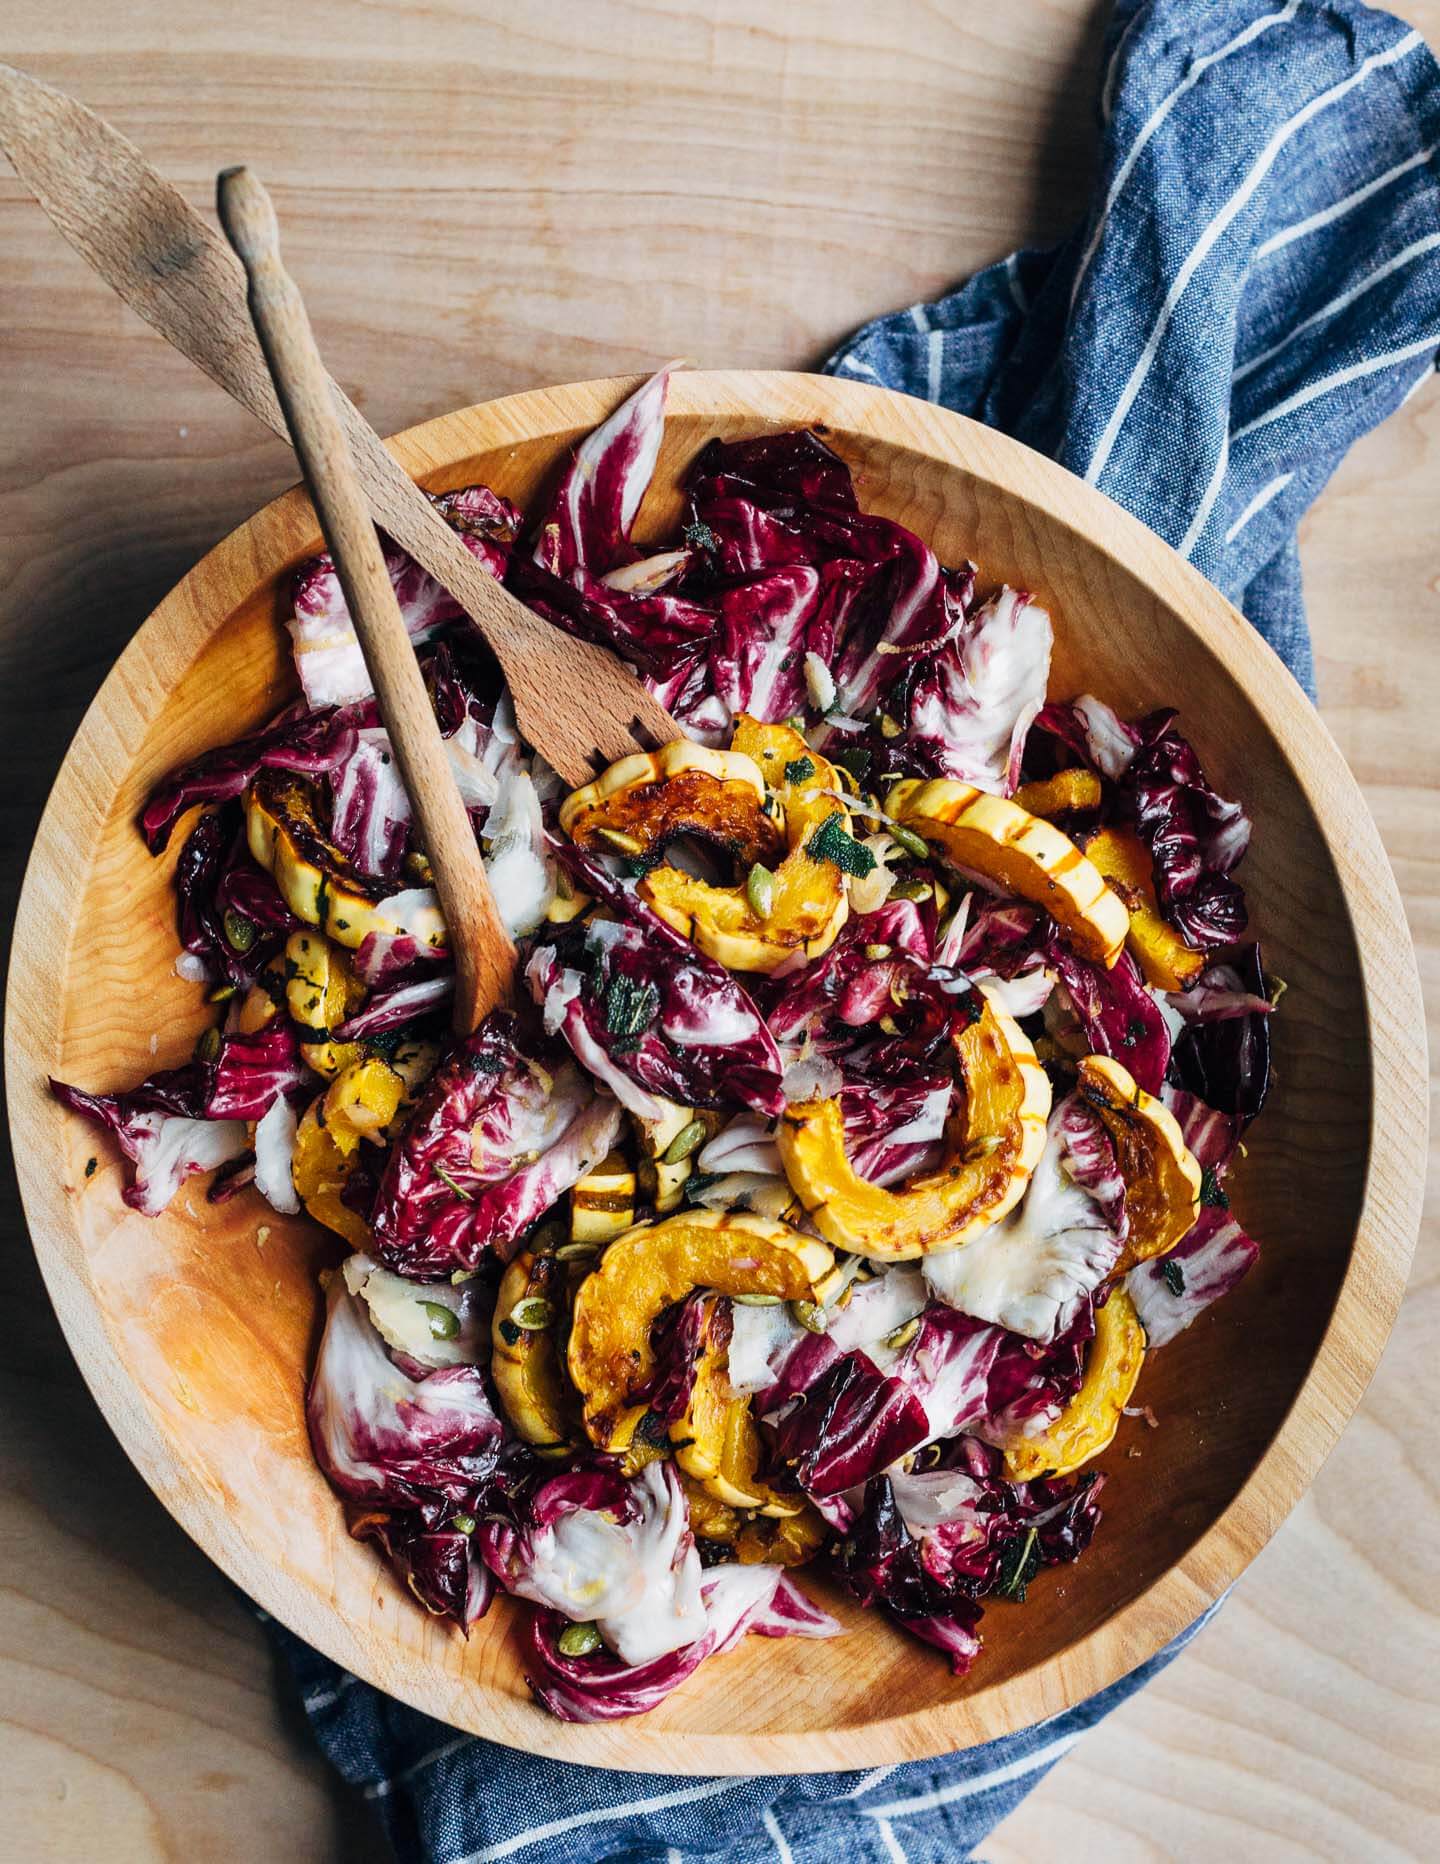 An autumnal radicchio and roasted delicata squash salad tossed in a lemon maple dressing, and topped with salty pepitas, crisp sage leaves, and Parmesan.